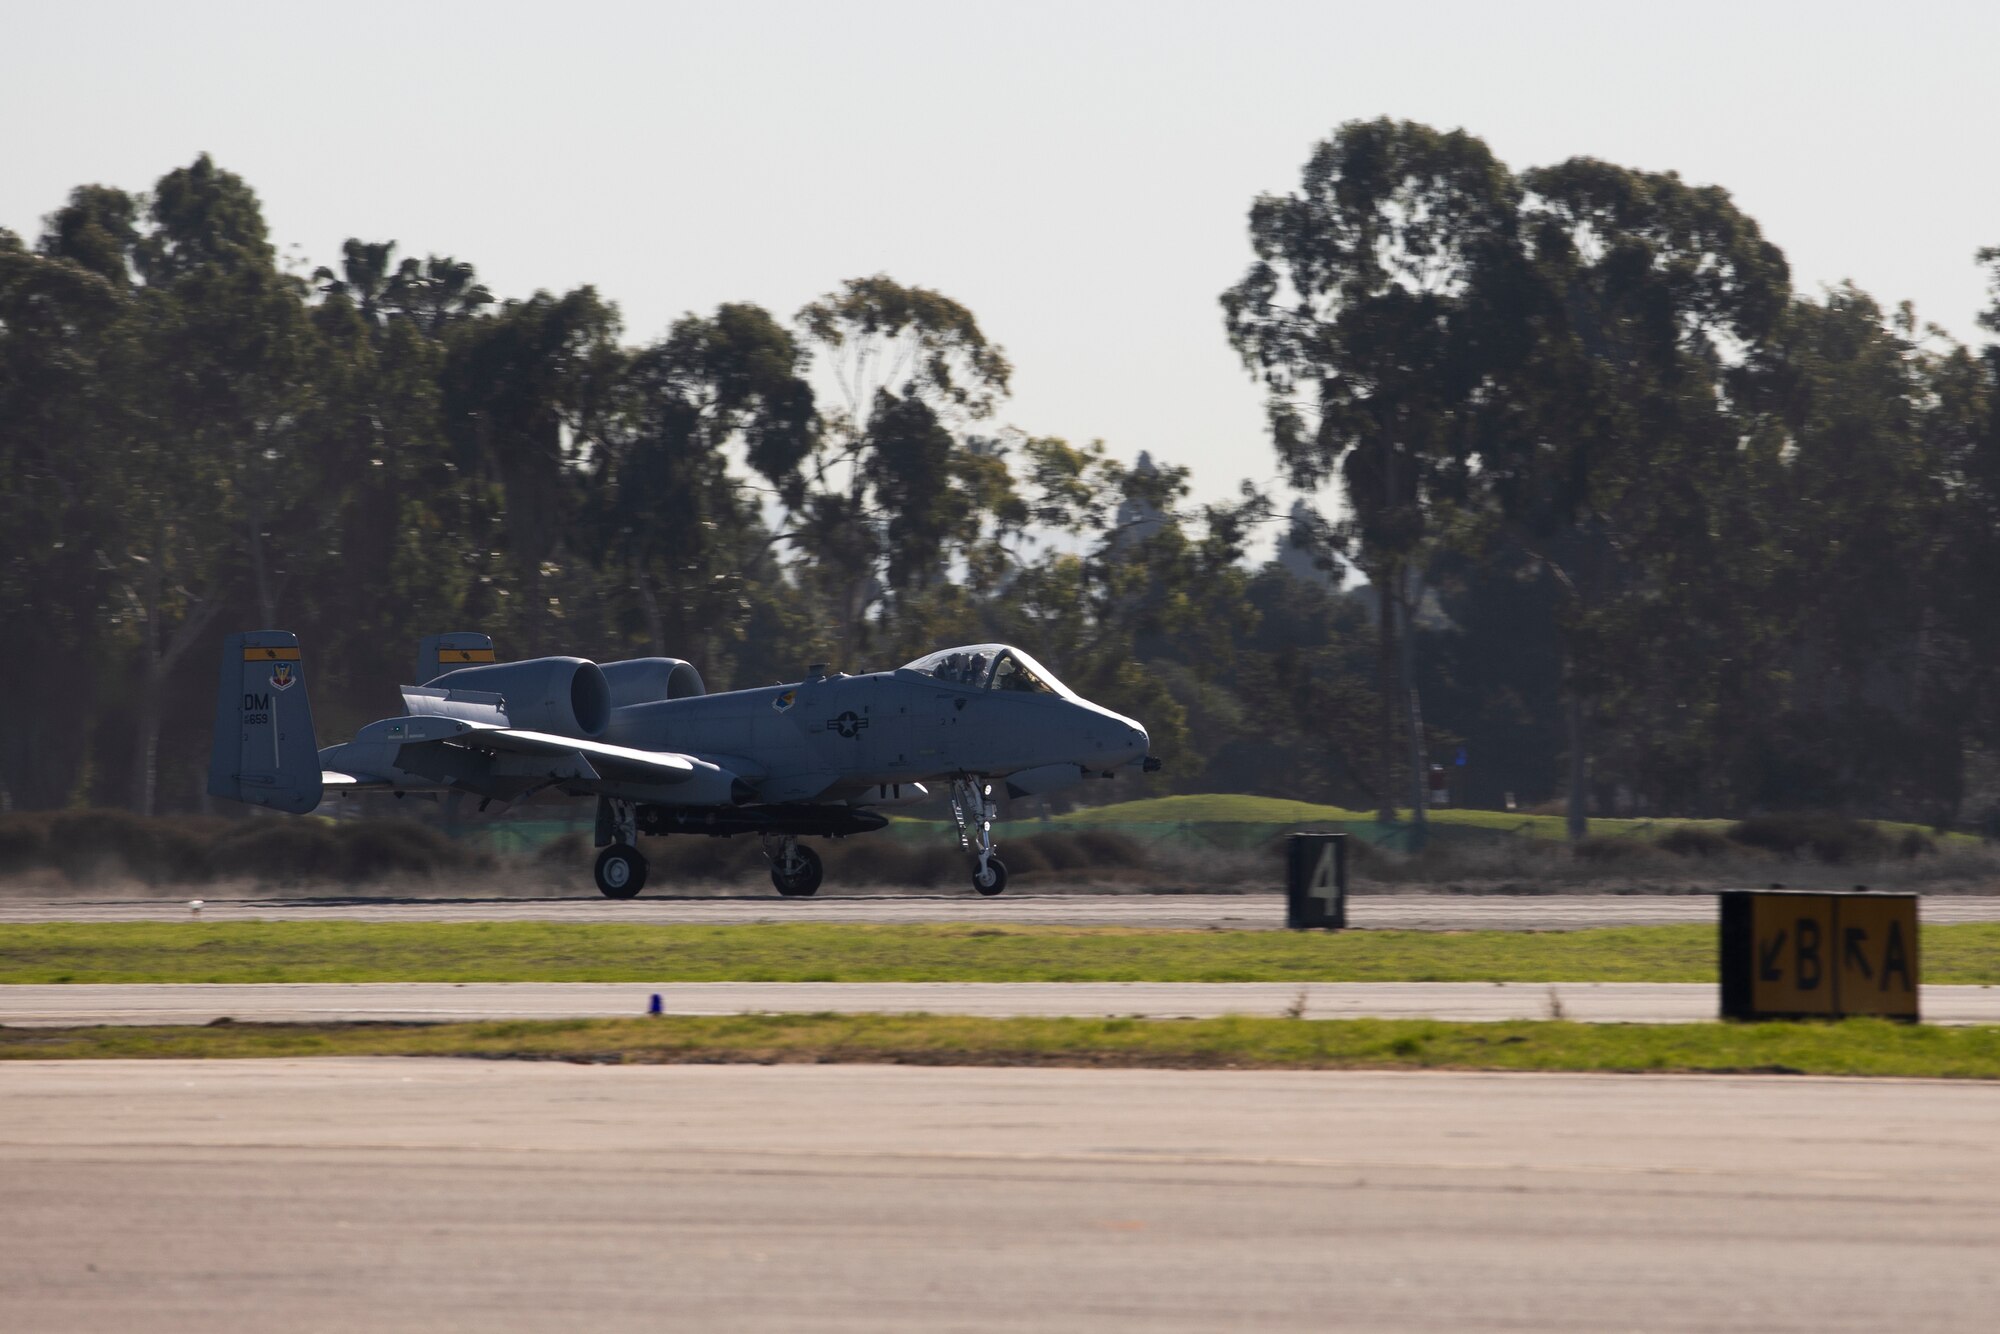 A U.S. Air Force A-10C Warthog II from the A-10C Thunderbolt II Demonstration Team, lands on Los Alamitos Army Airfield, Feb. 8, 2022, at Joint Forces Training Base, Los Alamitos, California. Five aircraft representing the Air Force’s 75 years as a service will perform a first-of-its-kind flyover of Super Bowl LVI in nearby Inglewood. Flyover aircraft are staging at the California National Guard base in the days leading up to the game. (U.S. Air National Guard photo by Staff Sgt. Crystal Housman)